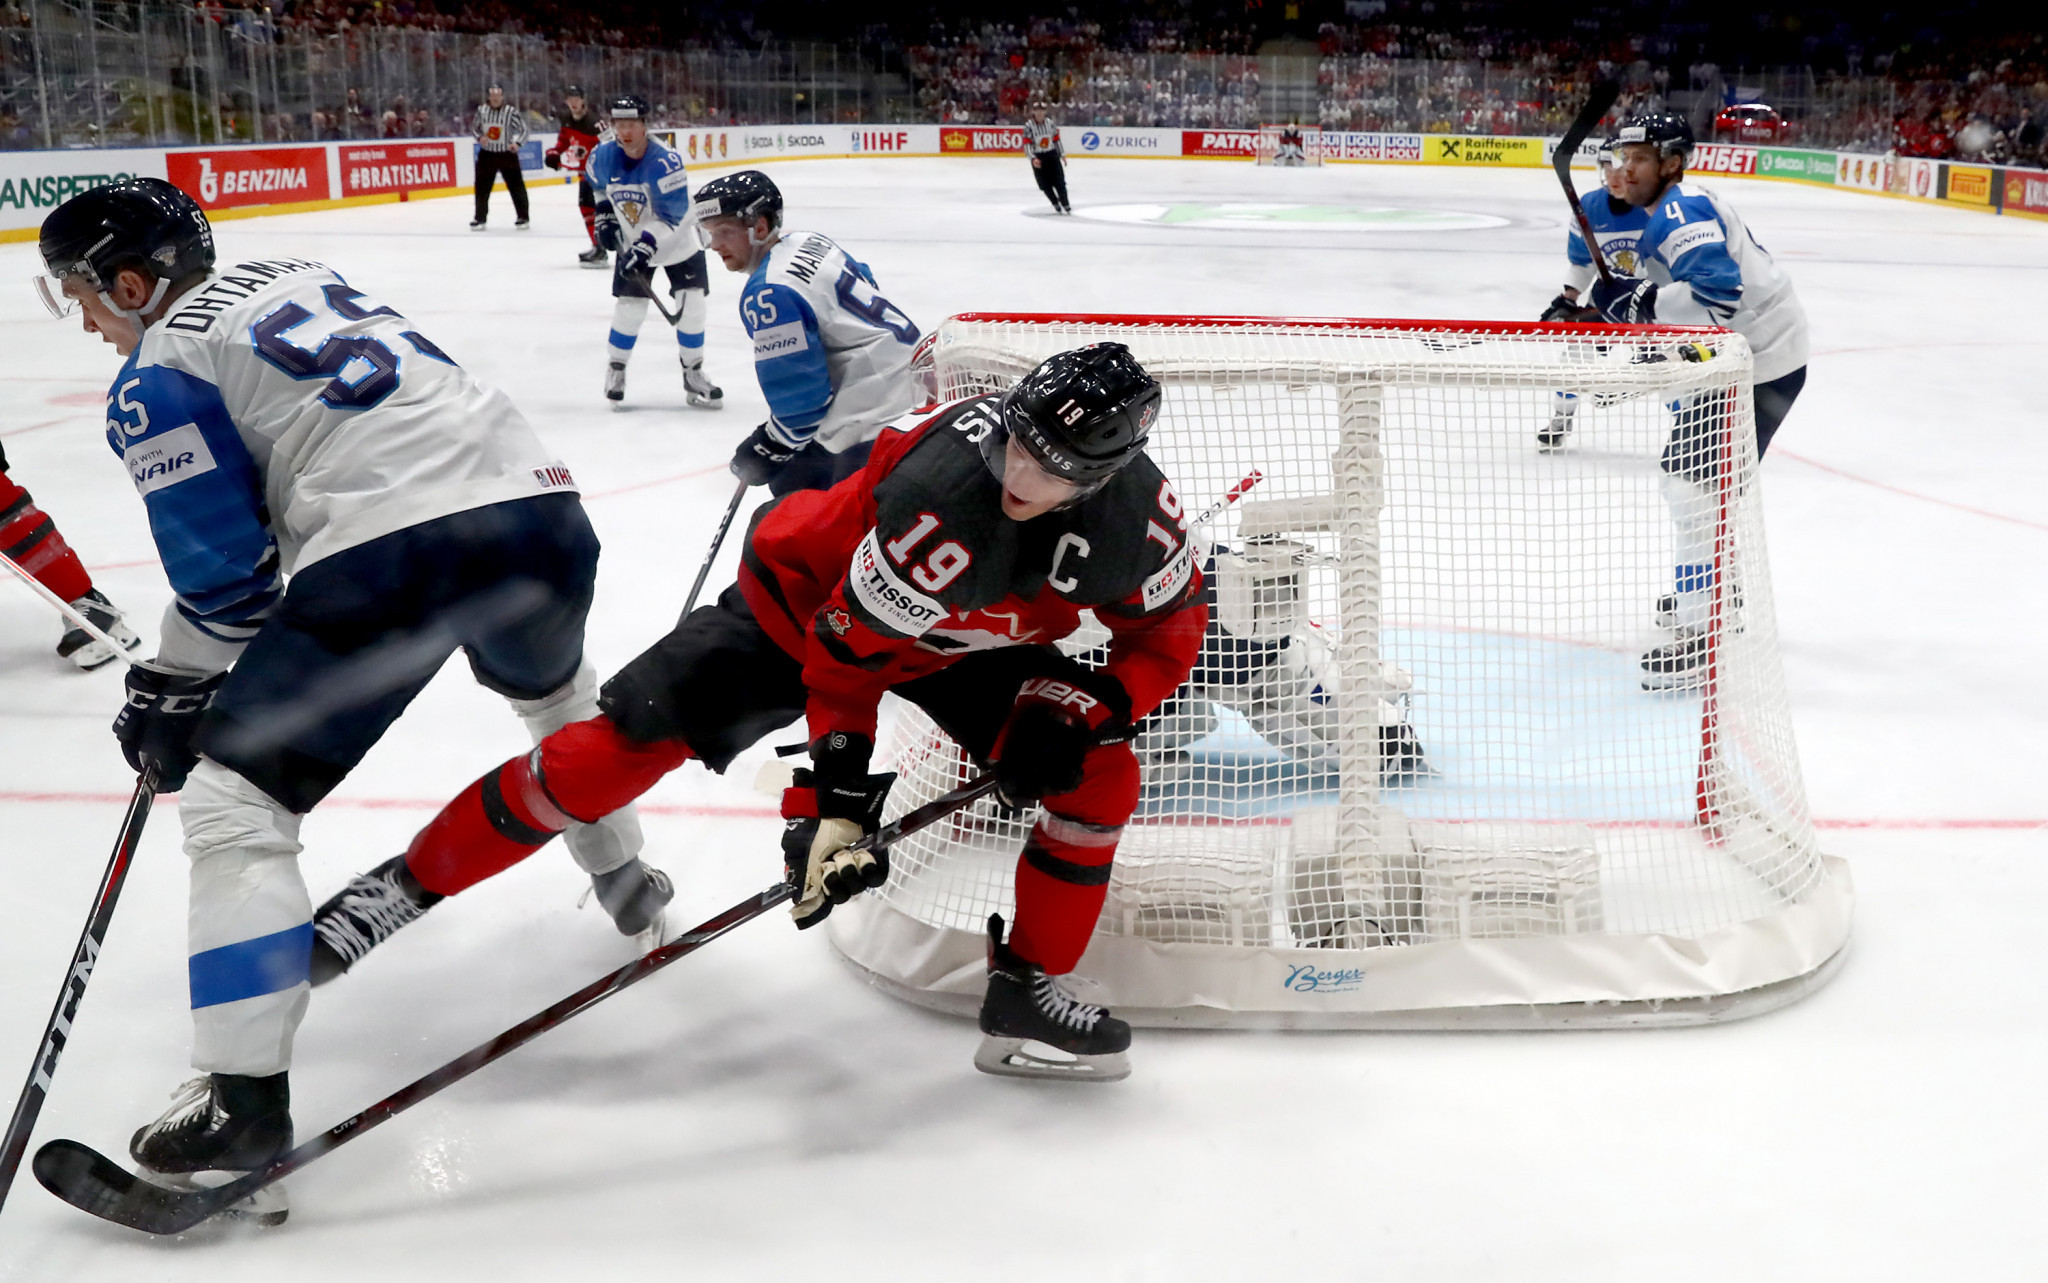 More than 1.5 billion people watched last year's IIHF World Championships in Slovakia - in which Finland beat Canada in the final - it has been claimed ©Getty Images